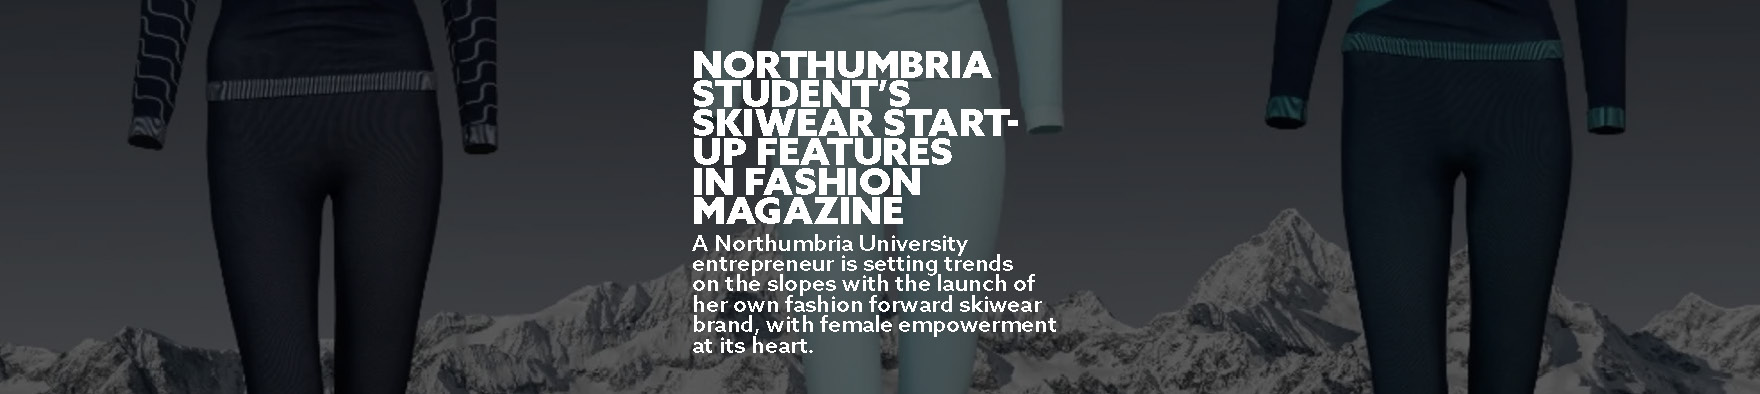 Northumbria students skiwear start-up features in fashion magazine